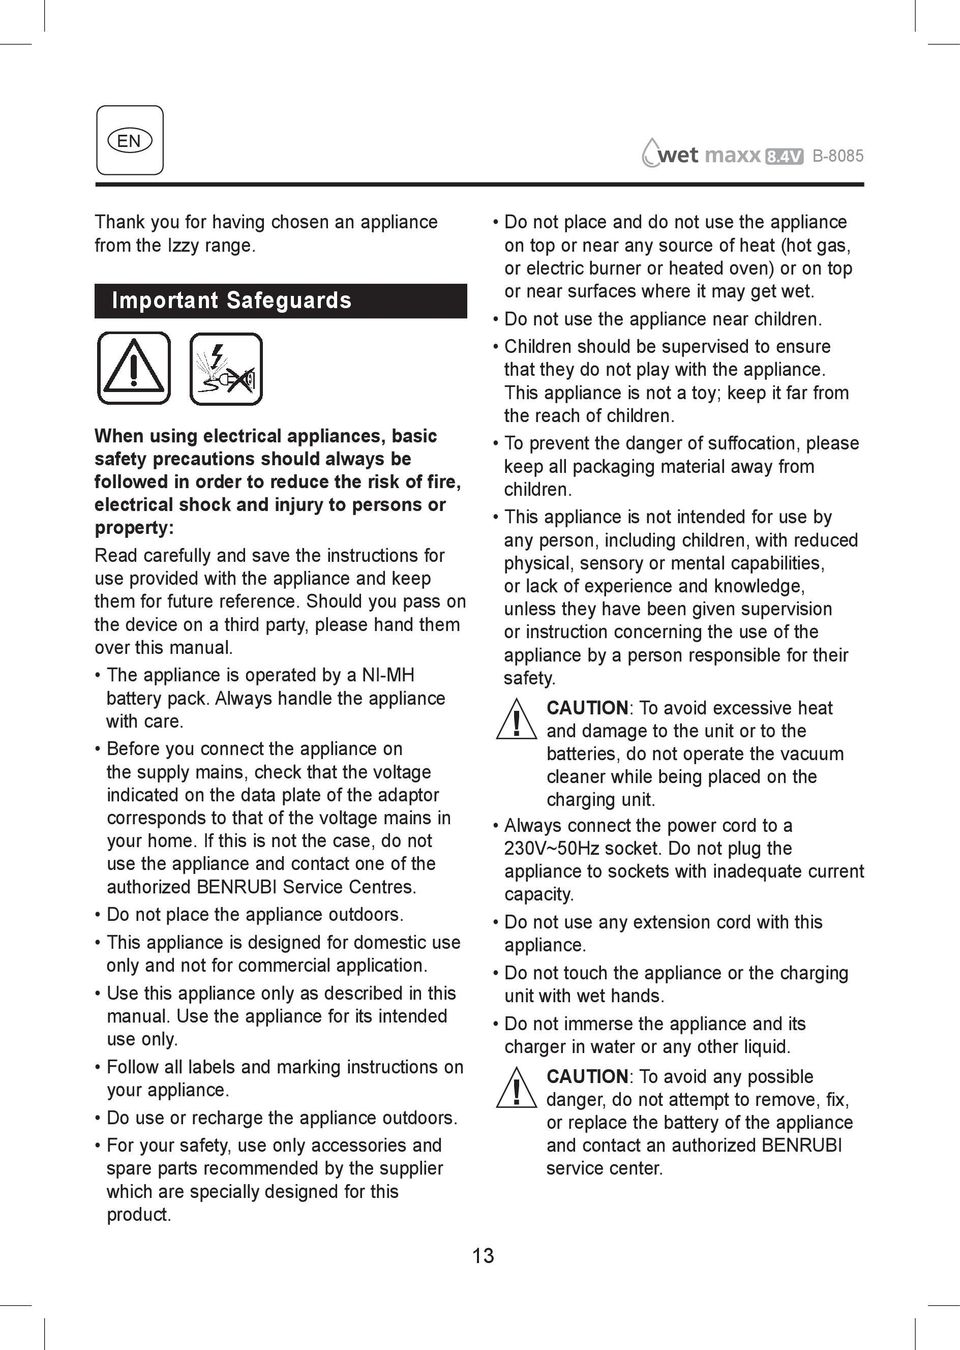 carefully and save the instructions for use provided with the appliance and keep them for future reference. Should you pass on the device on a third party, please hand them over this manual.